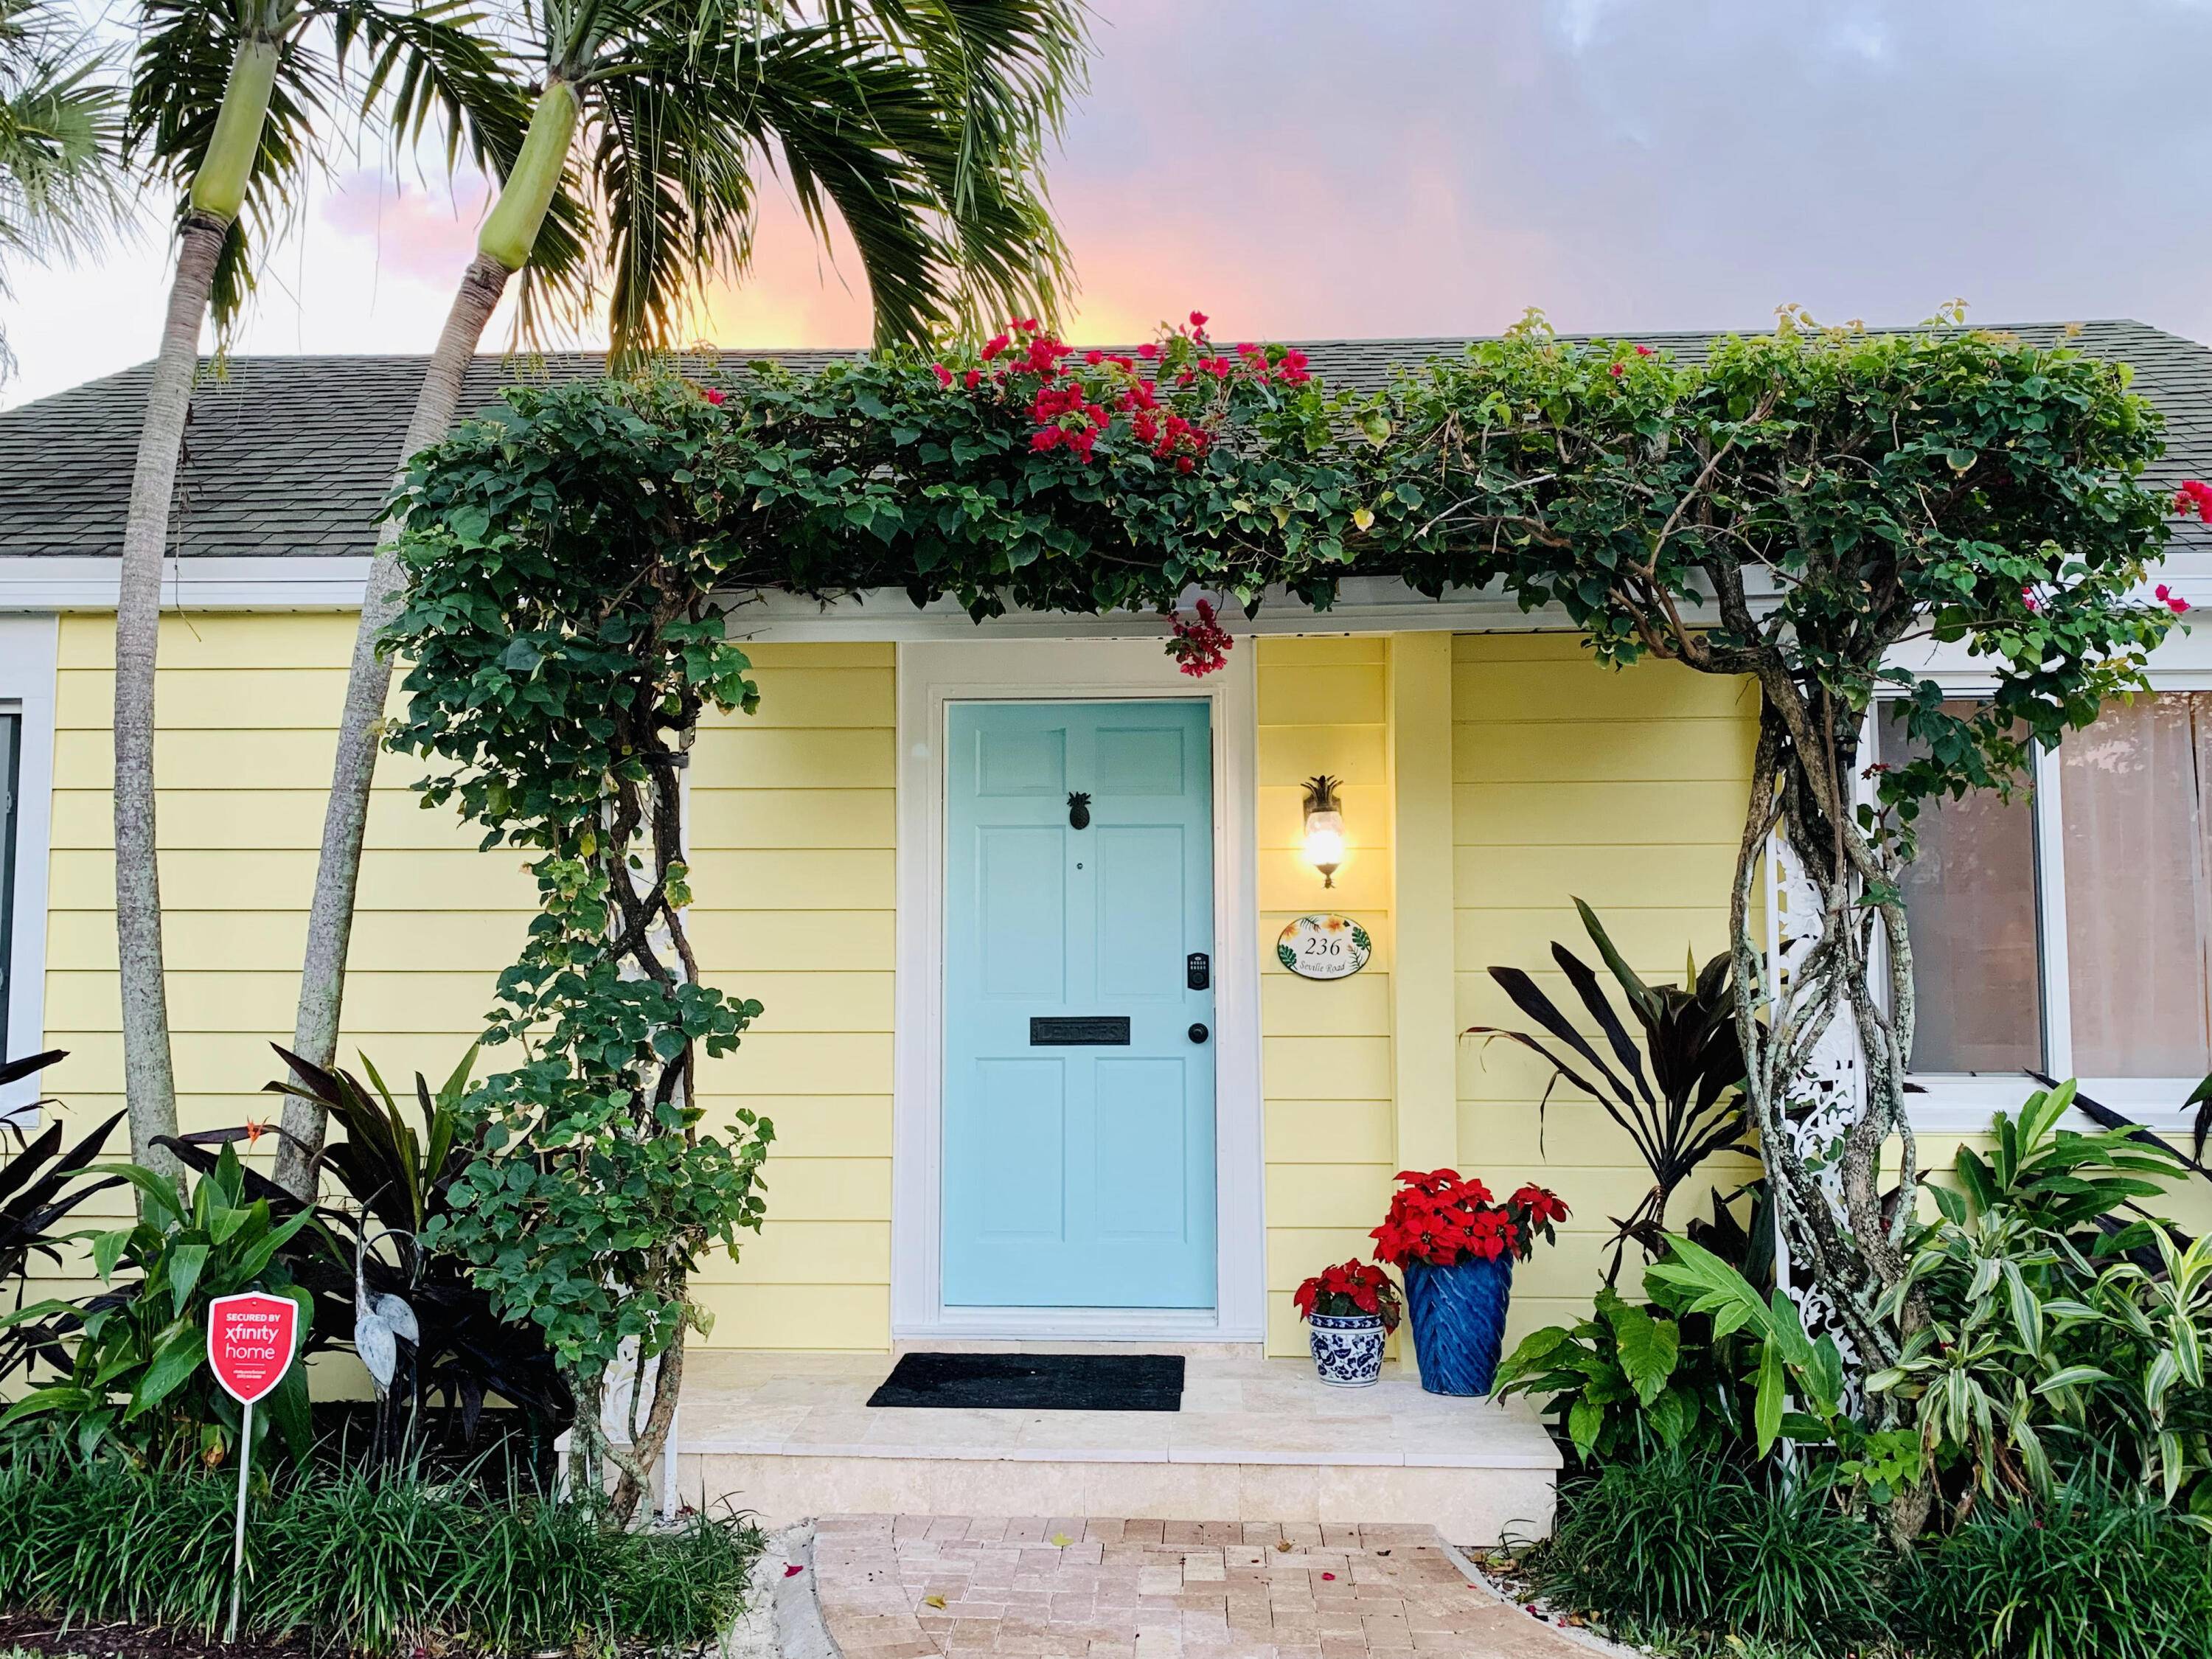 Welcome to Paradise ! Unpack and relax in this coastal, charming, private property with an amazing backyard and bonus guest cottage or detached office !